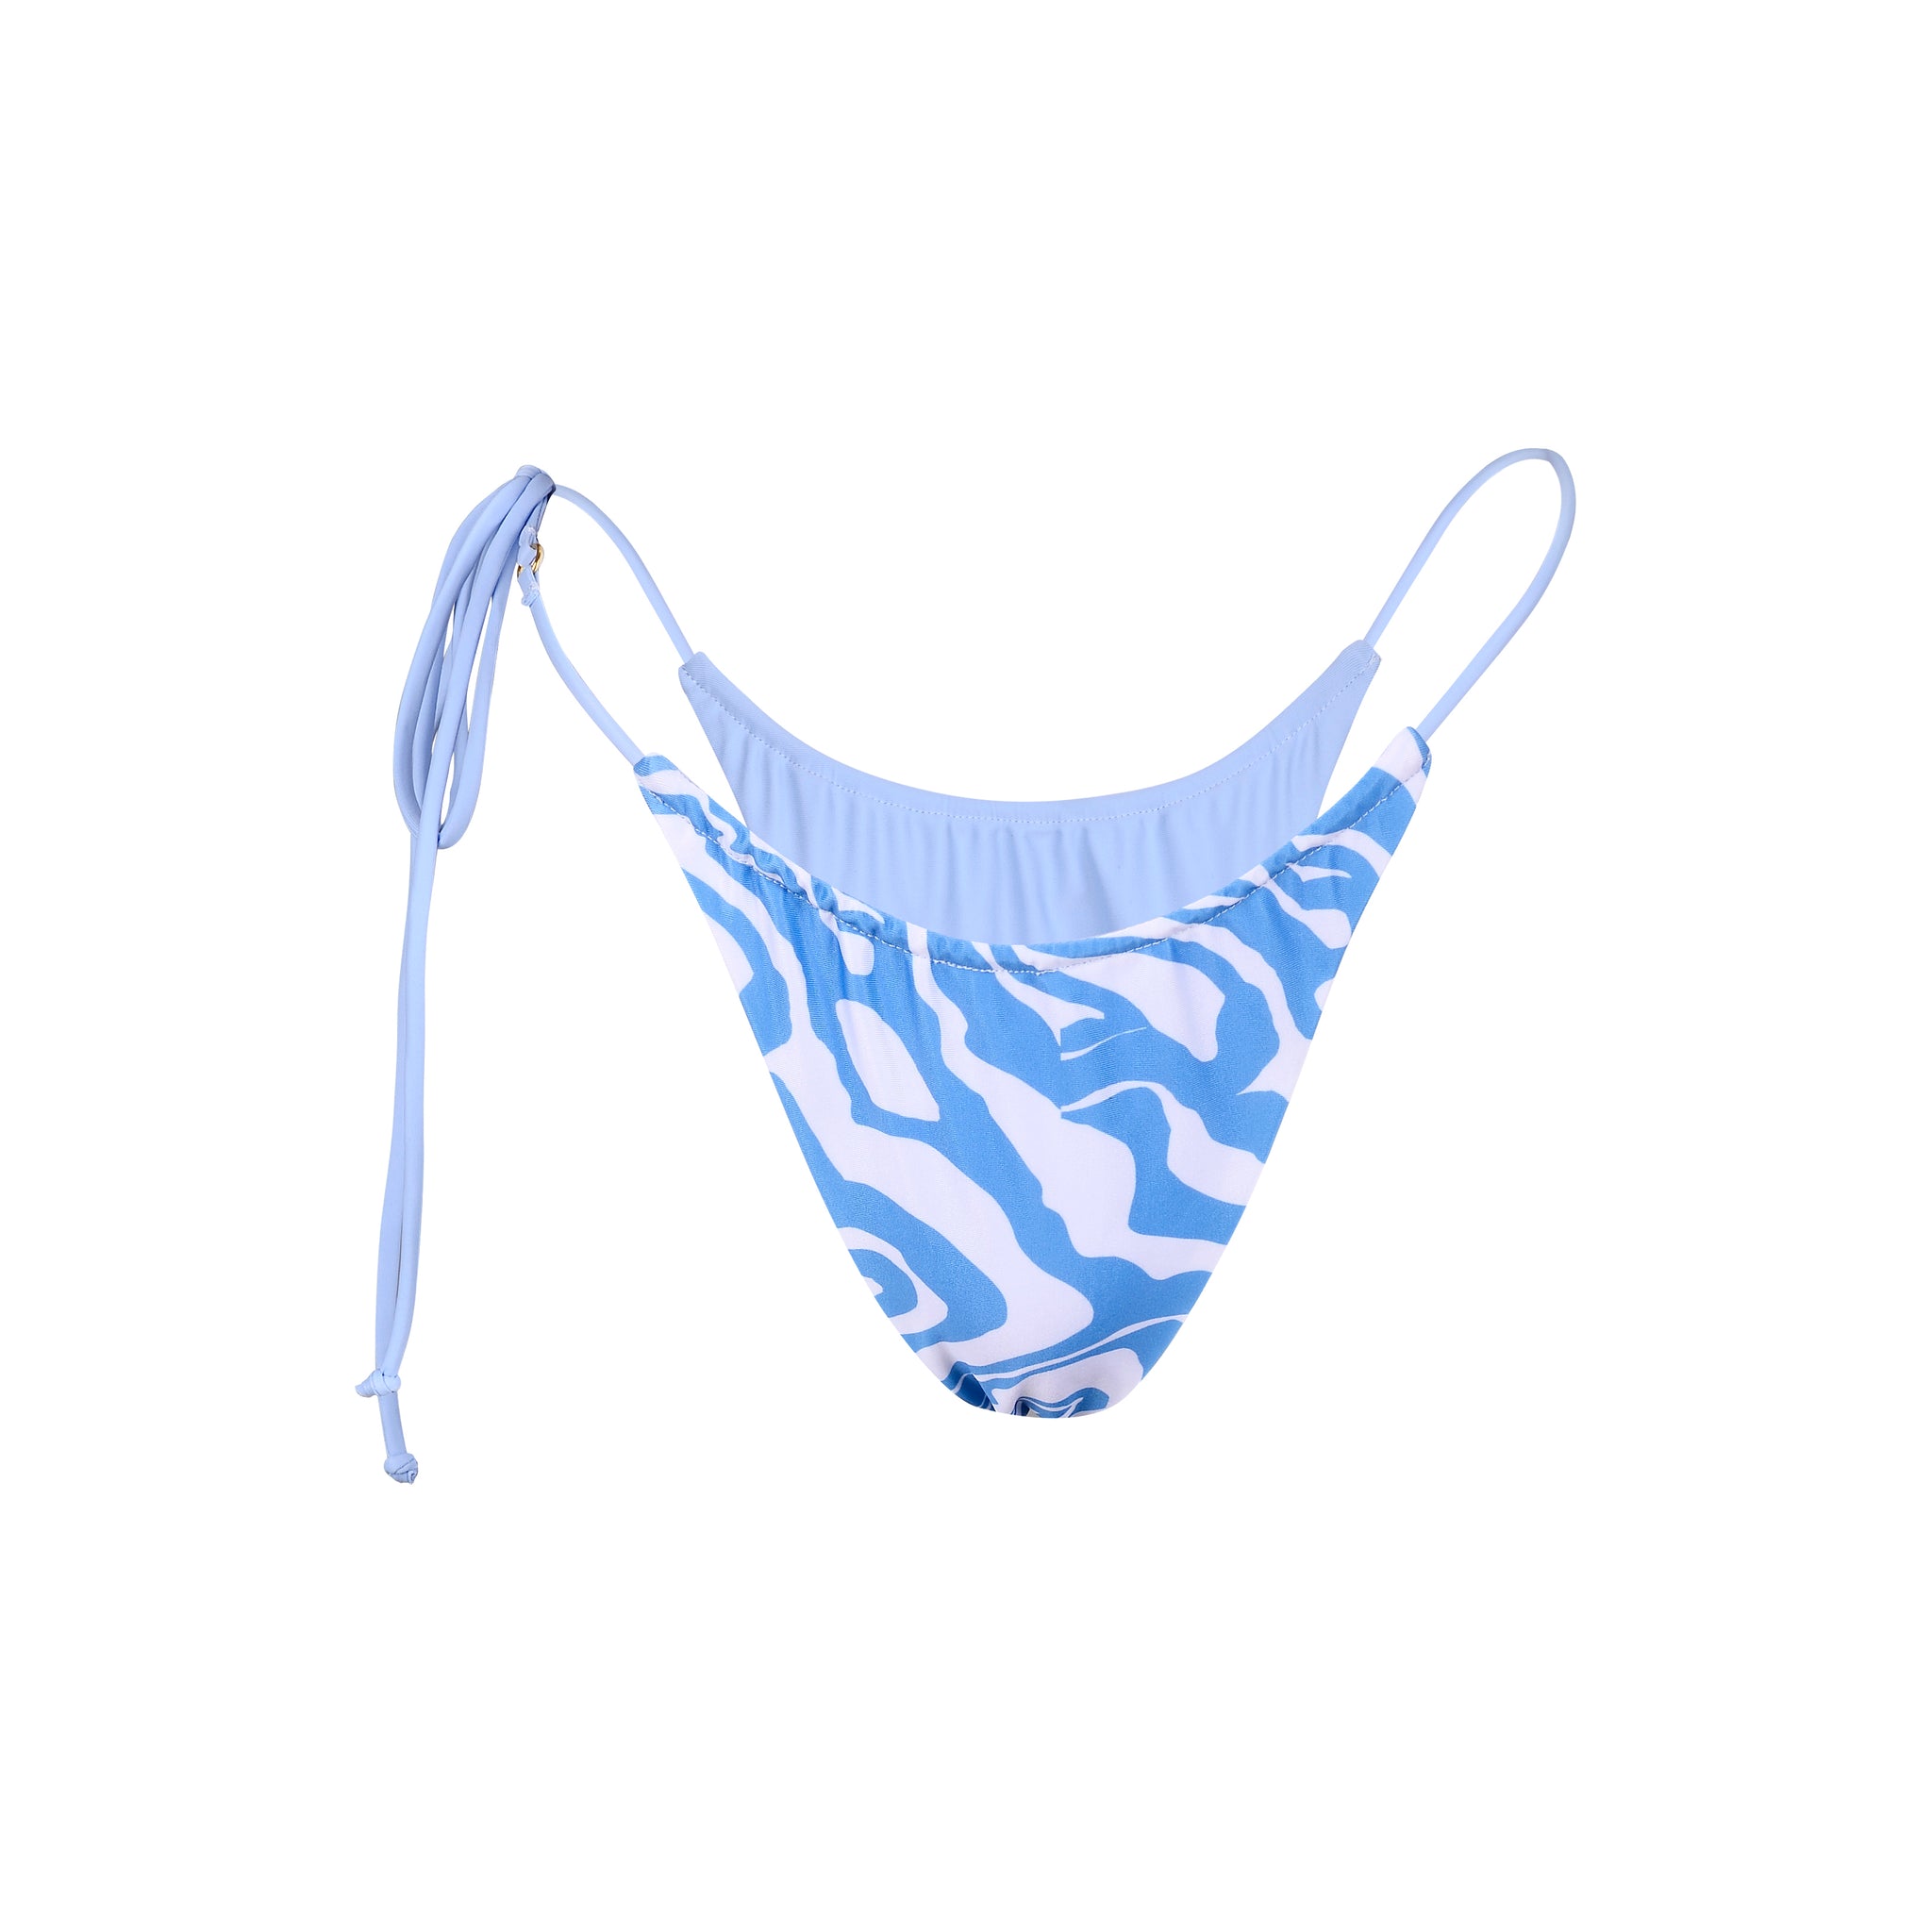 XENA TRIANGLE BOTTOM (BLUE-SWIRL) - Swimwear THIS IS A LOVE SONG